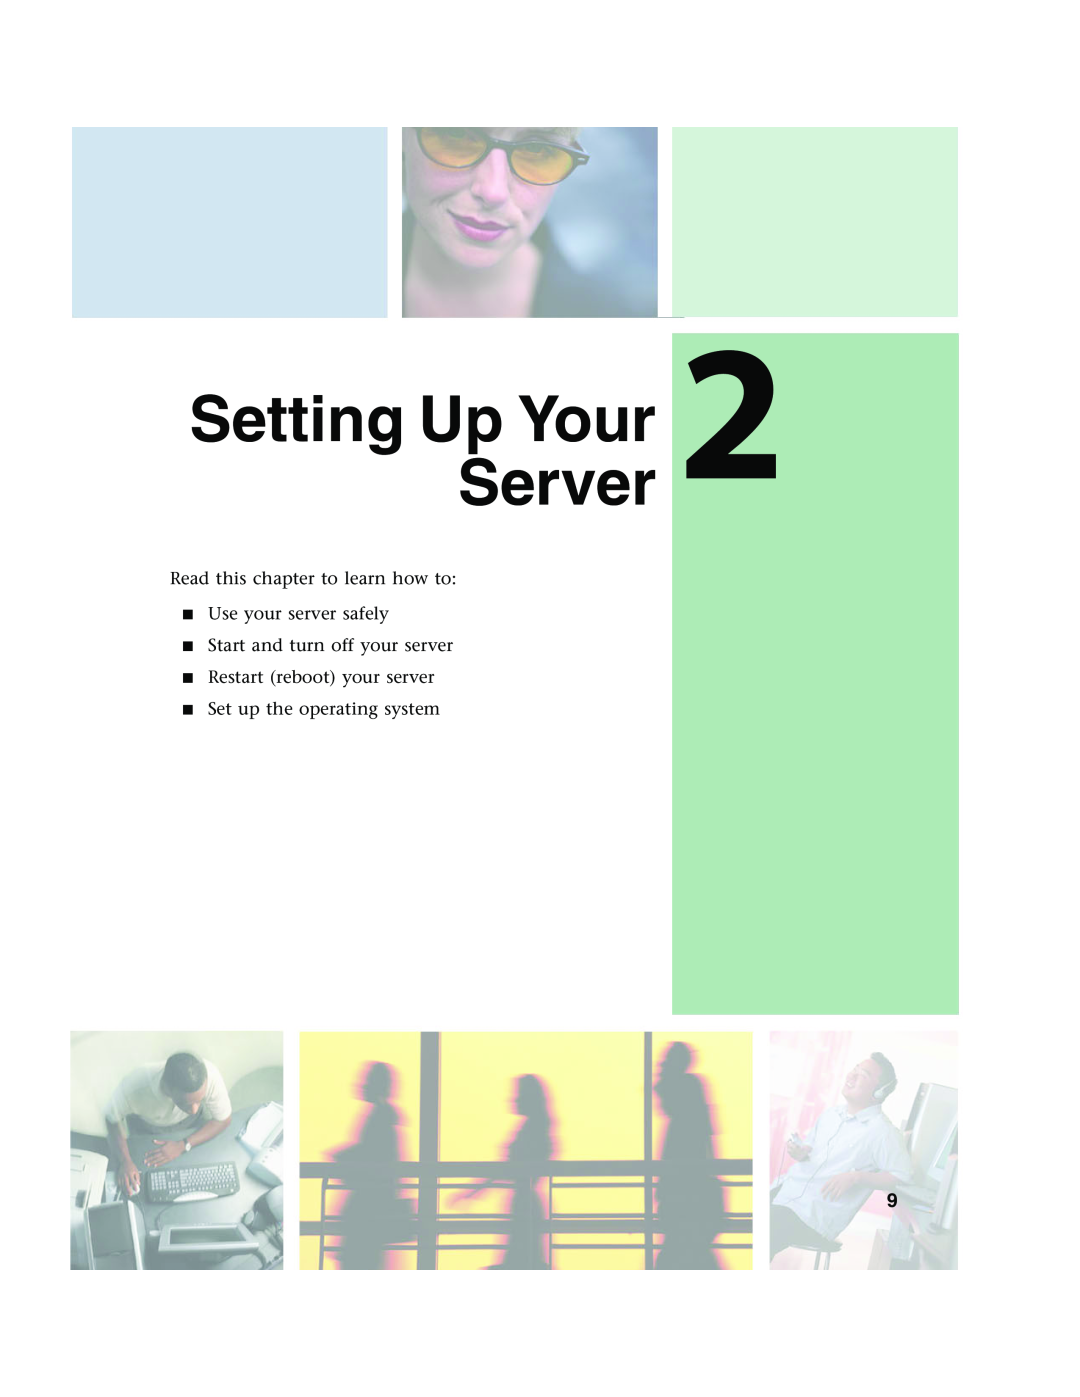 Gateway 980 Setting UpServerYour, Read this chapter to learn how to Use your server safely, Set up the operating system 